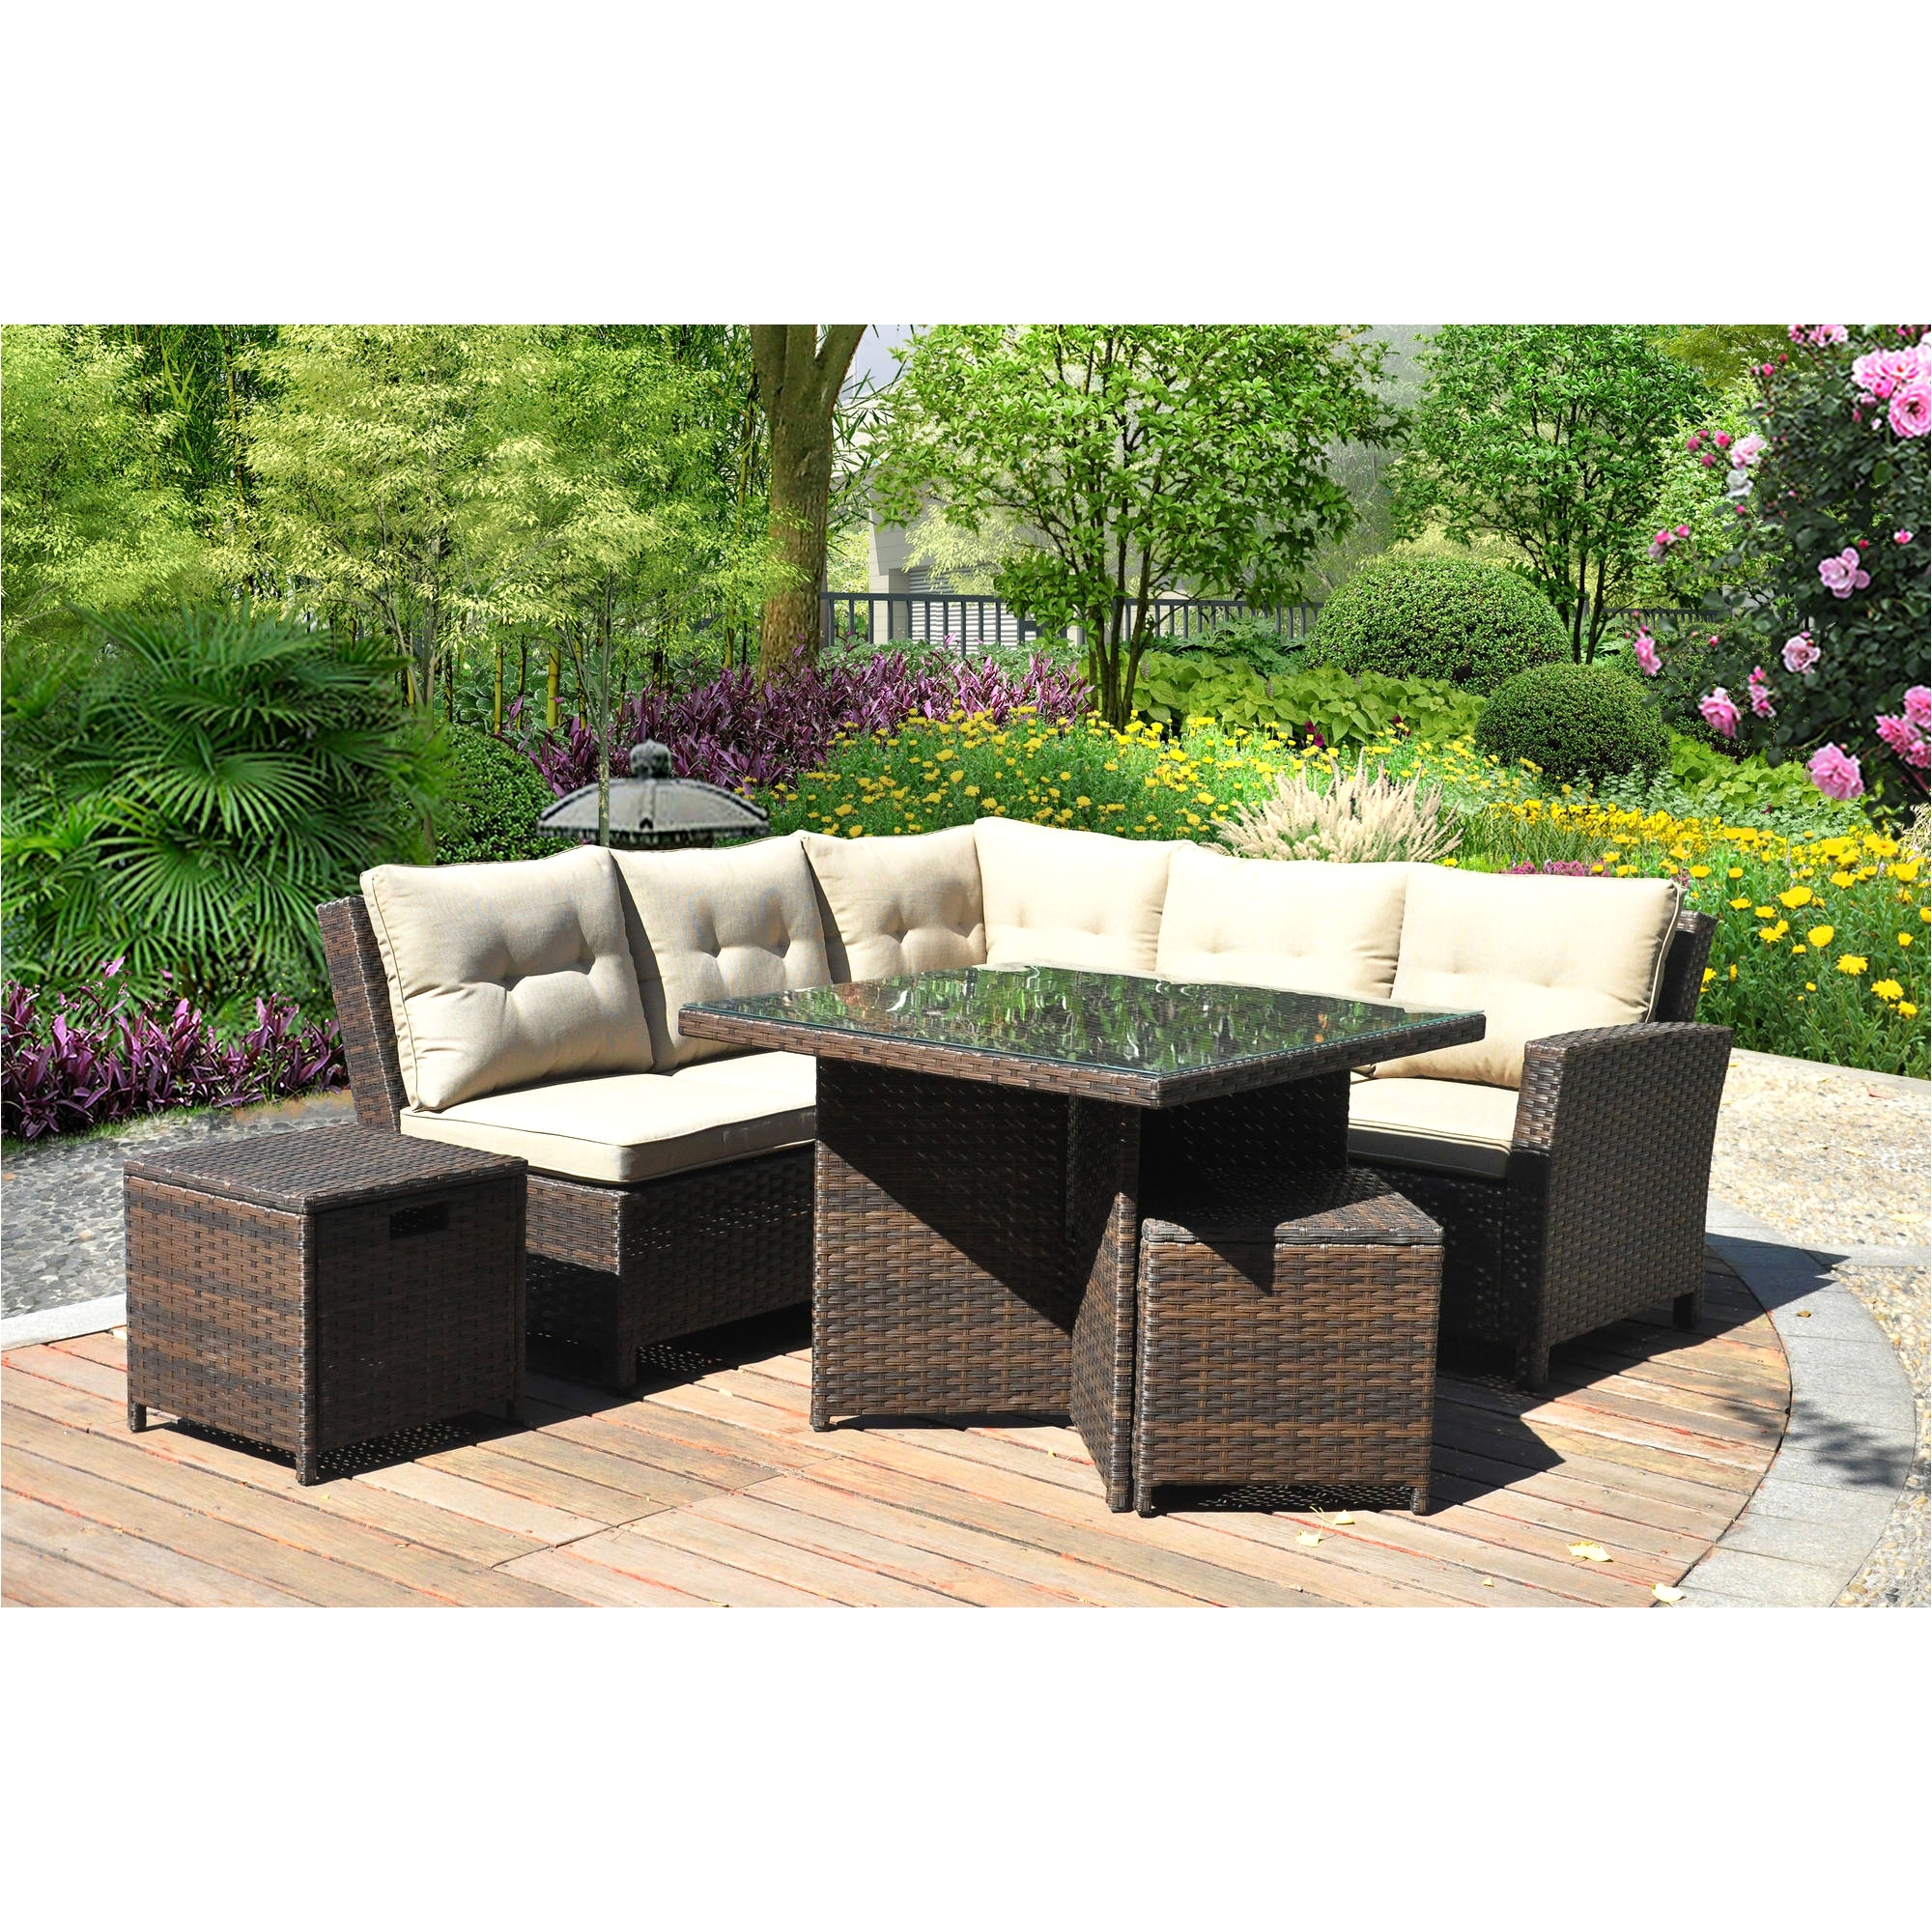 house gorgeous outdoor furniture sale costco sonoma awesome patio at home and interior design ideas of